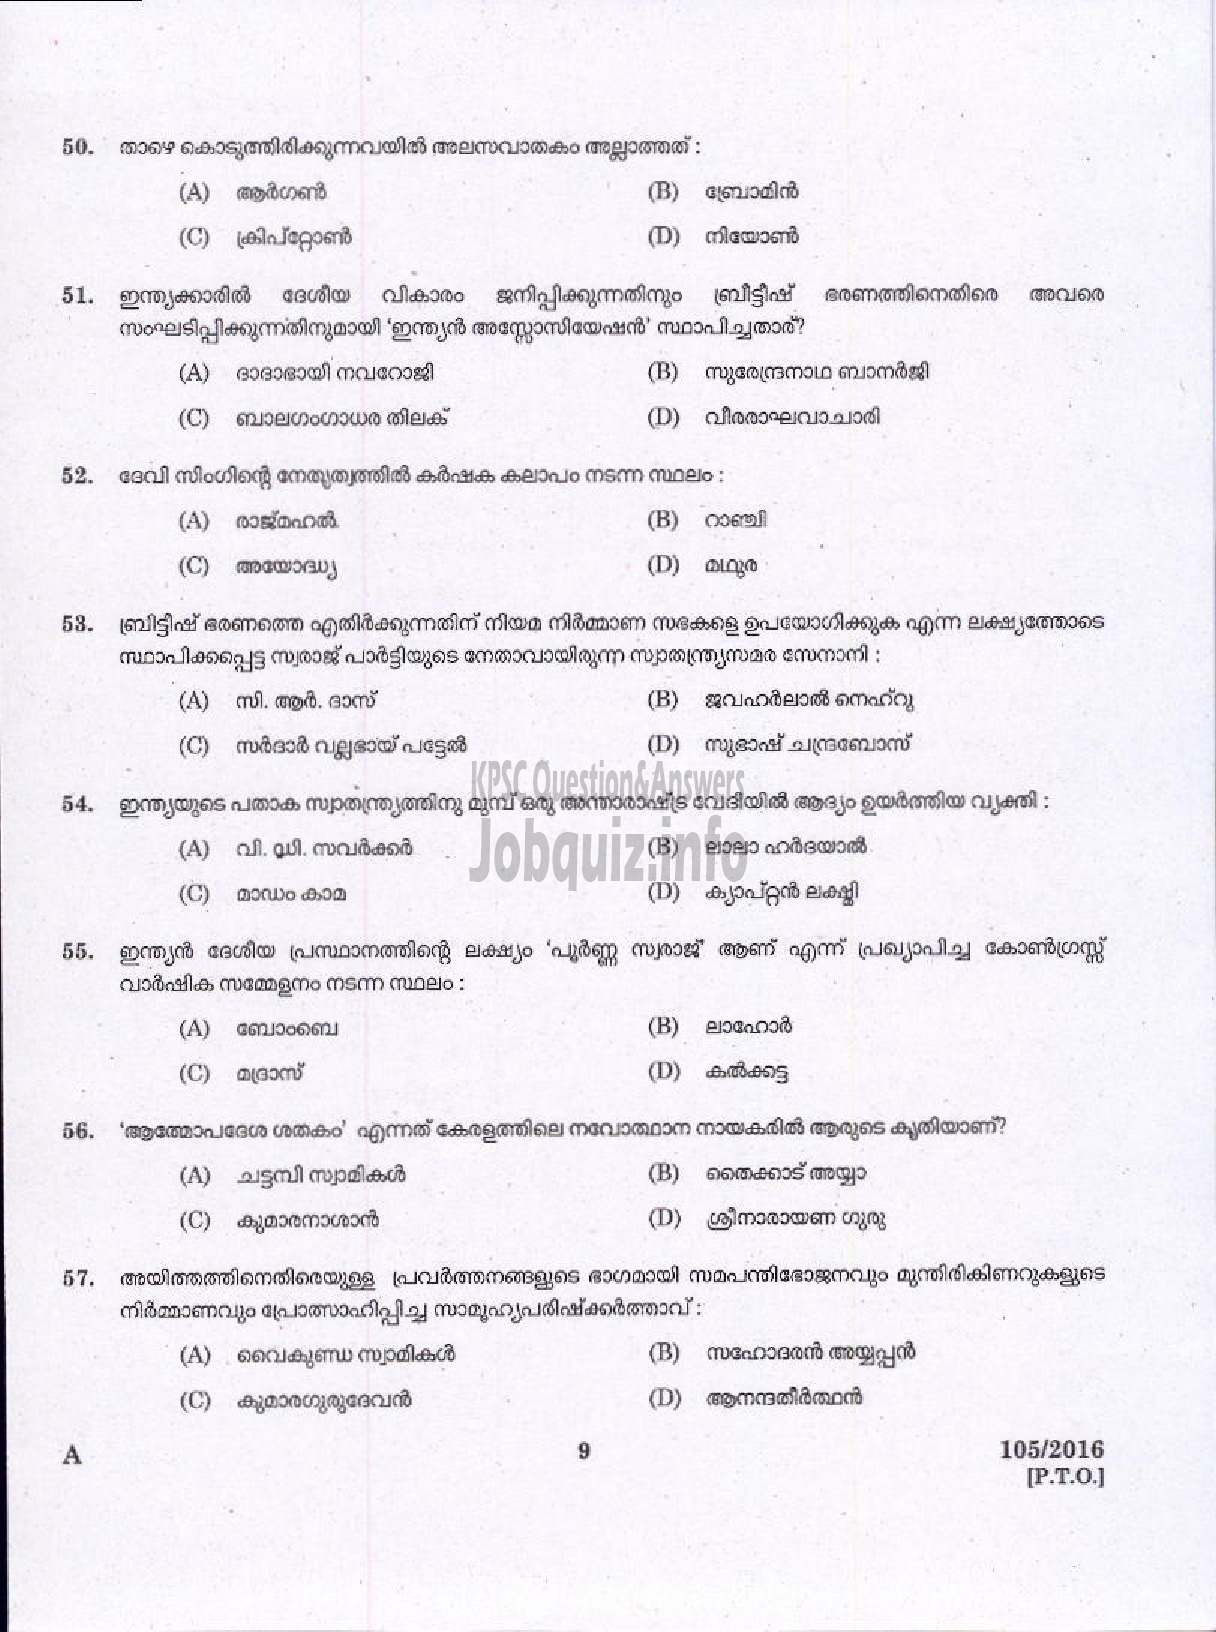 Kerala PSC Question Paper - LOWER DIVISION CLERK KANNADA AND MALAYALAM KNOWING VARIOUS-7